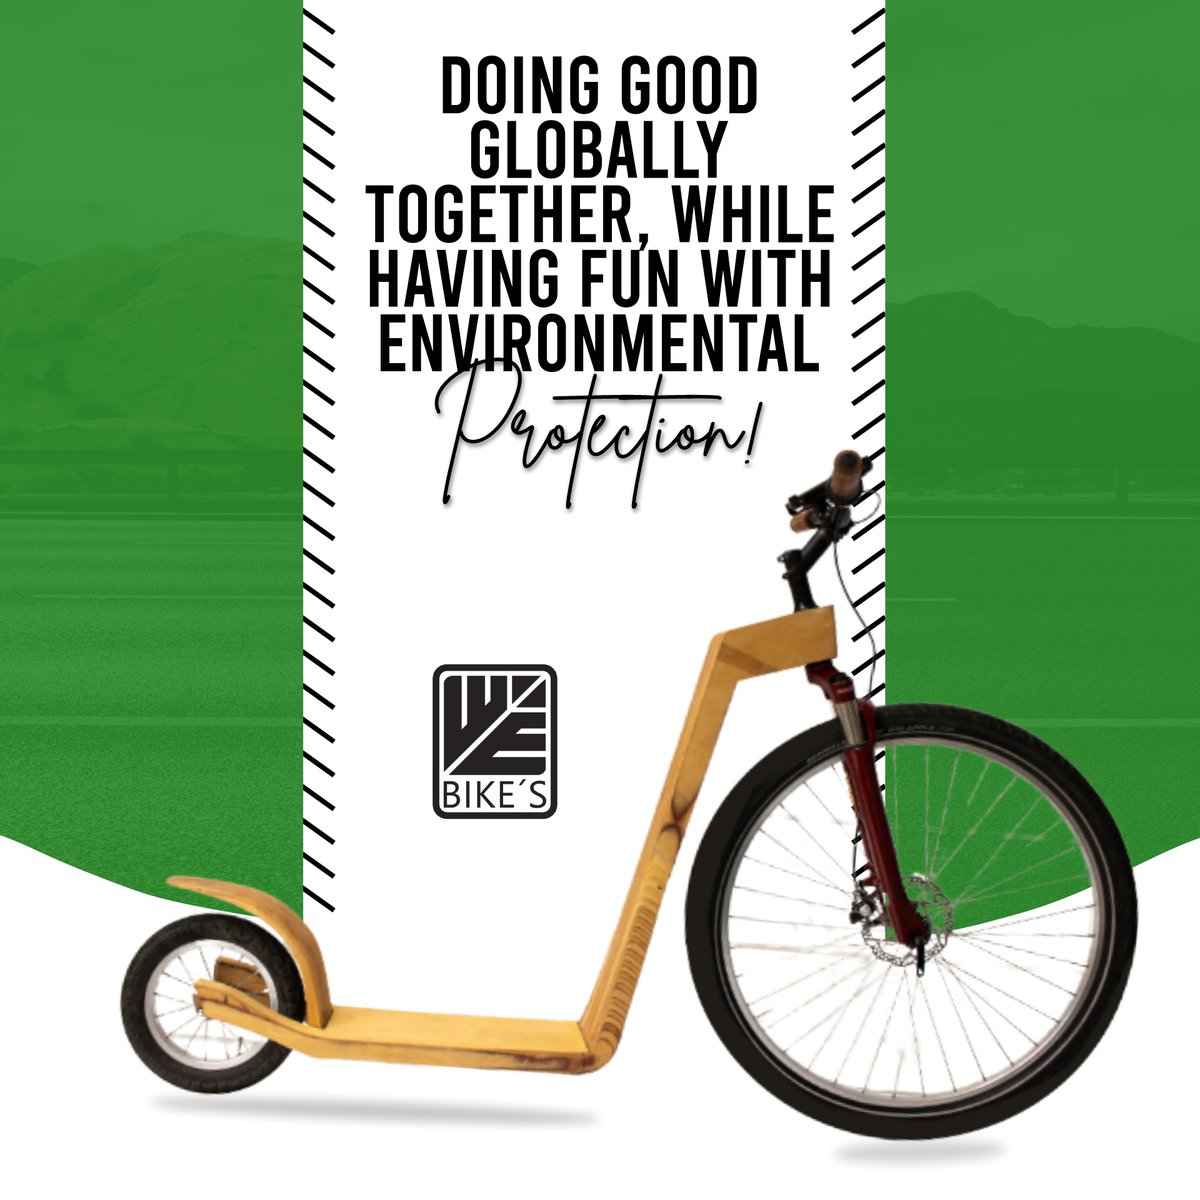 For us humans the revival of the wooden scooter but also an aid for the upcoming climate problems! The wooden kick bikes from WE-Bikes are unique handmade wooden scooters for young and old.
----
🌐 wooden-kickbike.de
.
#woodenkickbikes #wooden #unique #handmade #webikes